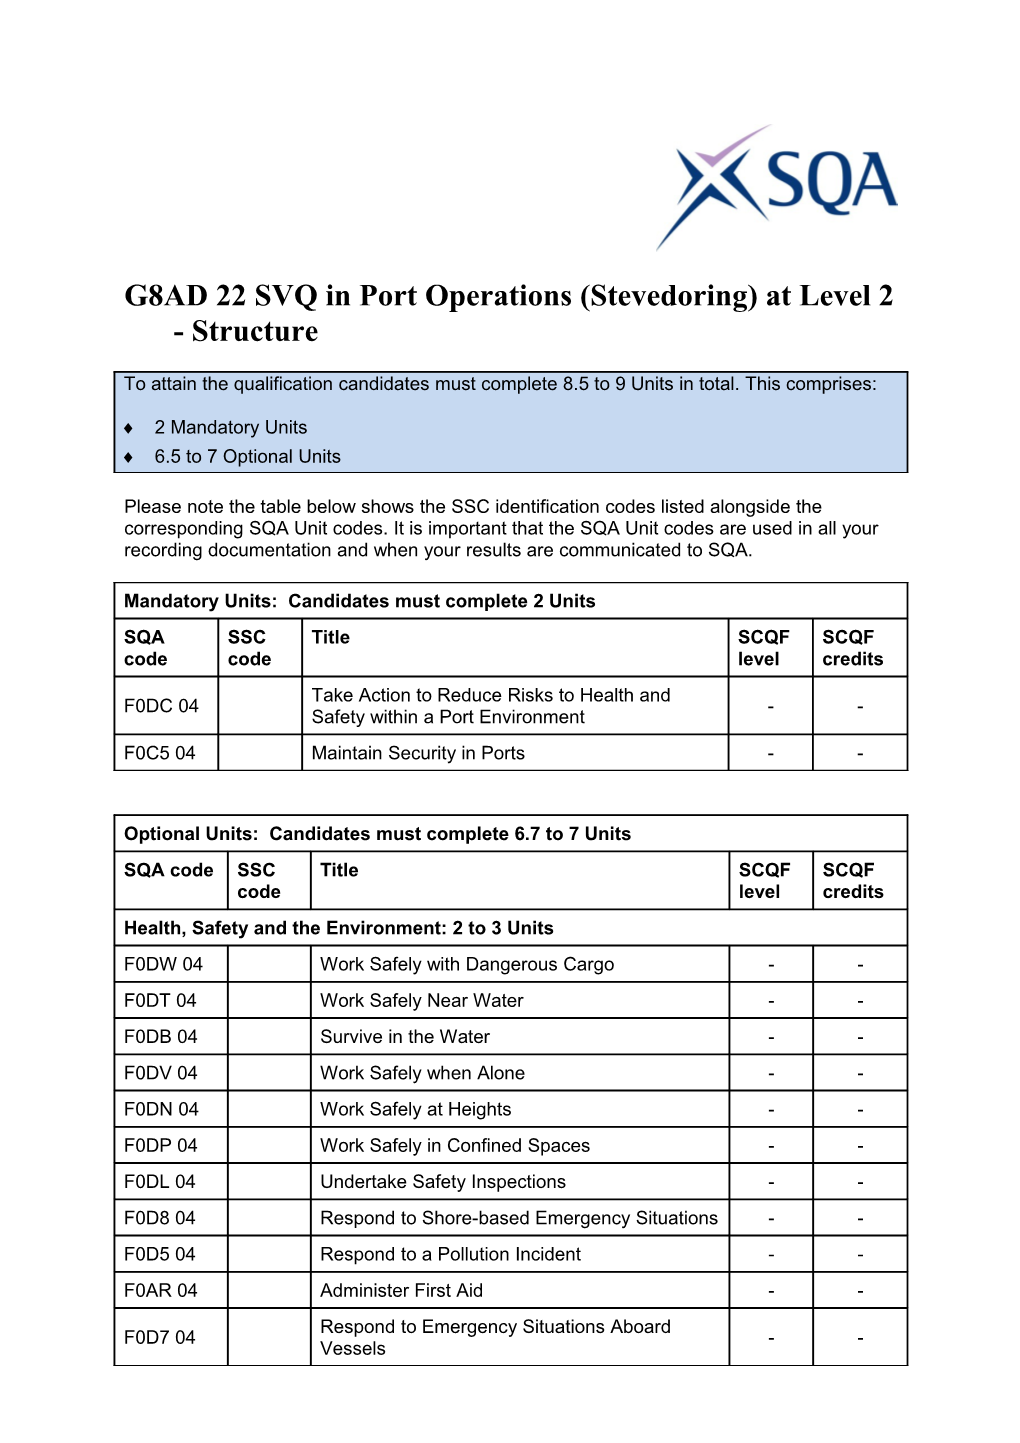 G8AD 22 SVQ in Port Operations (Stevedoring) at Level 2 - Structure